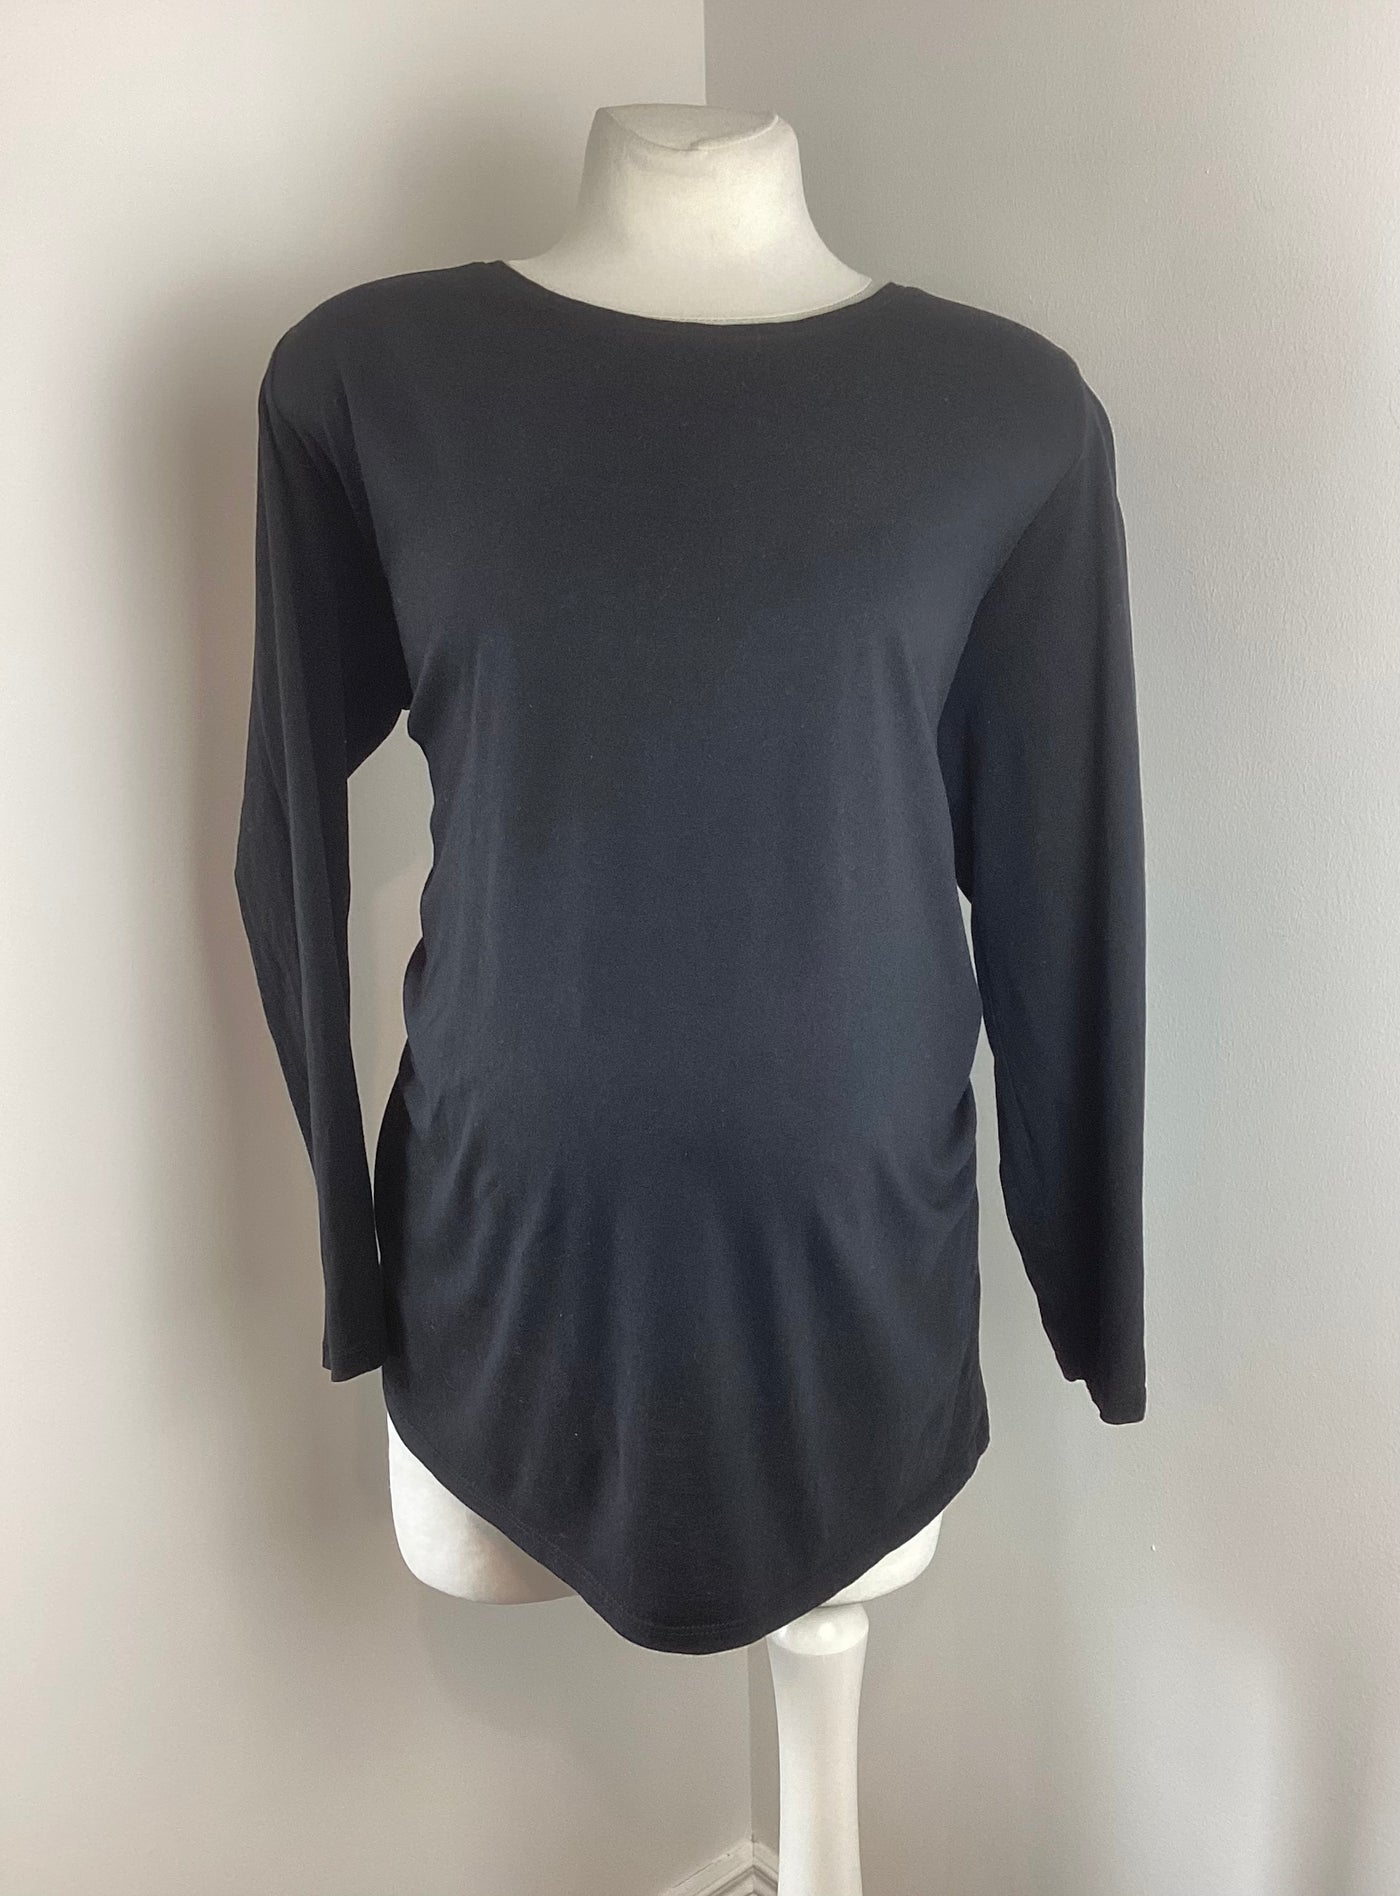 New Look Maternity black long sleeved top - Size 18